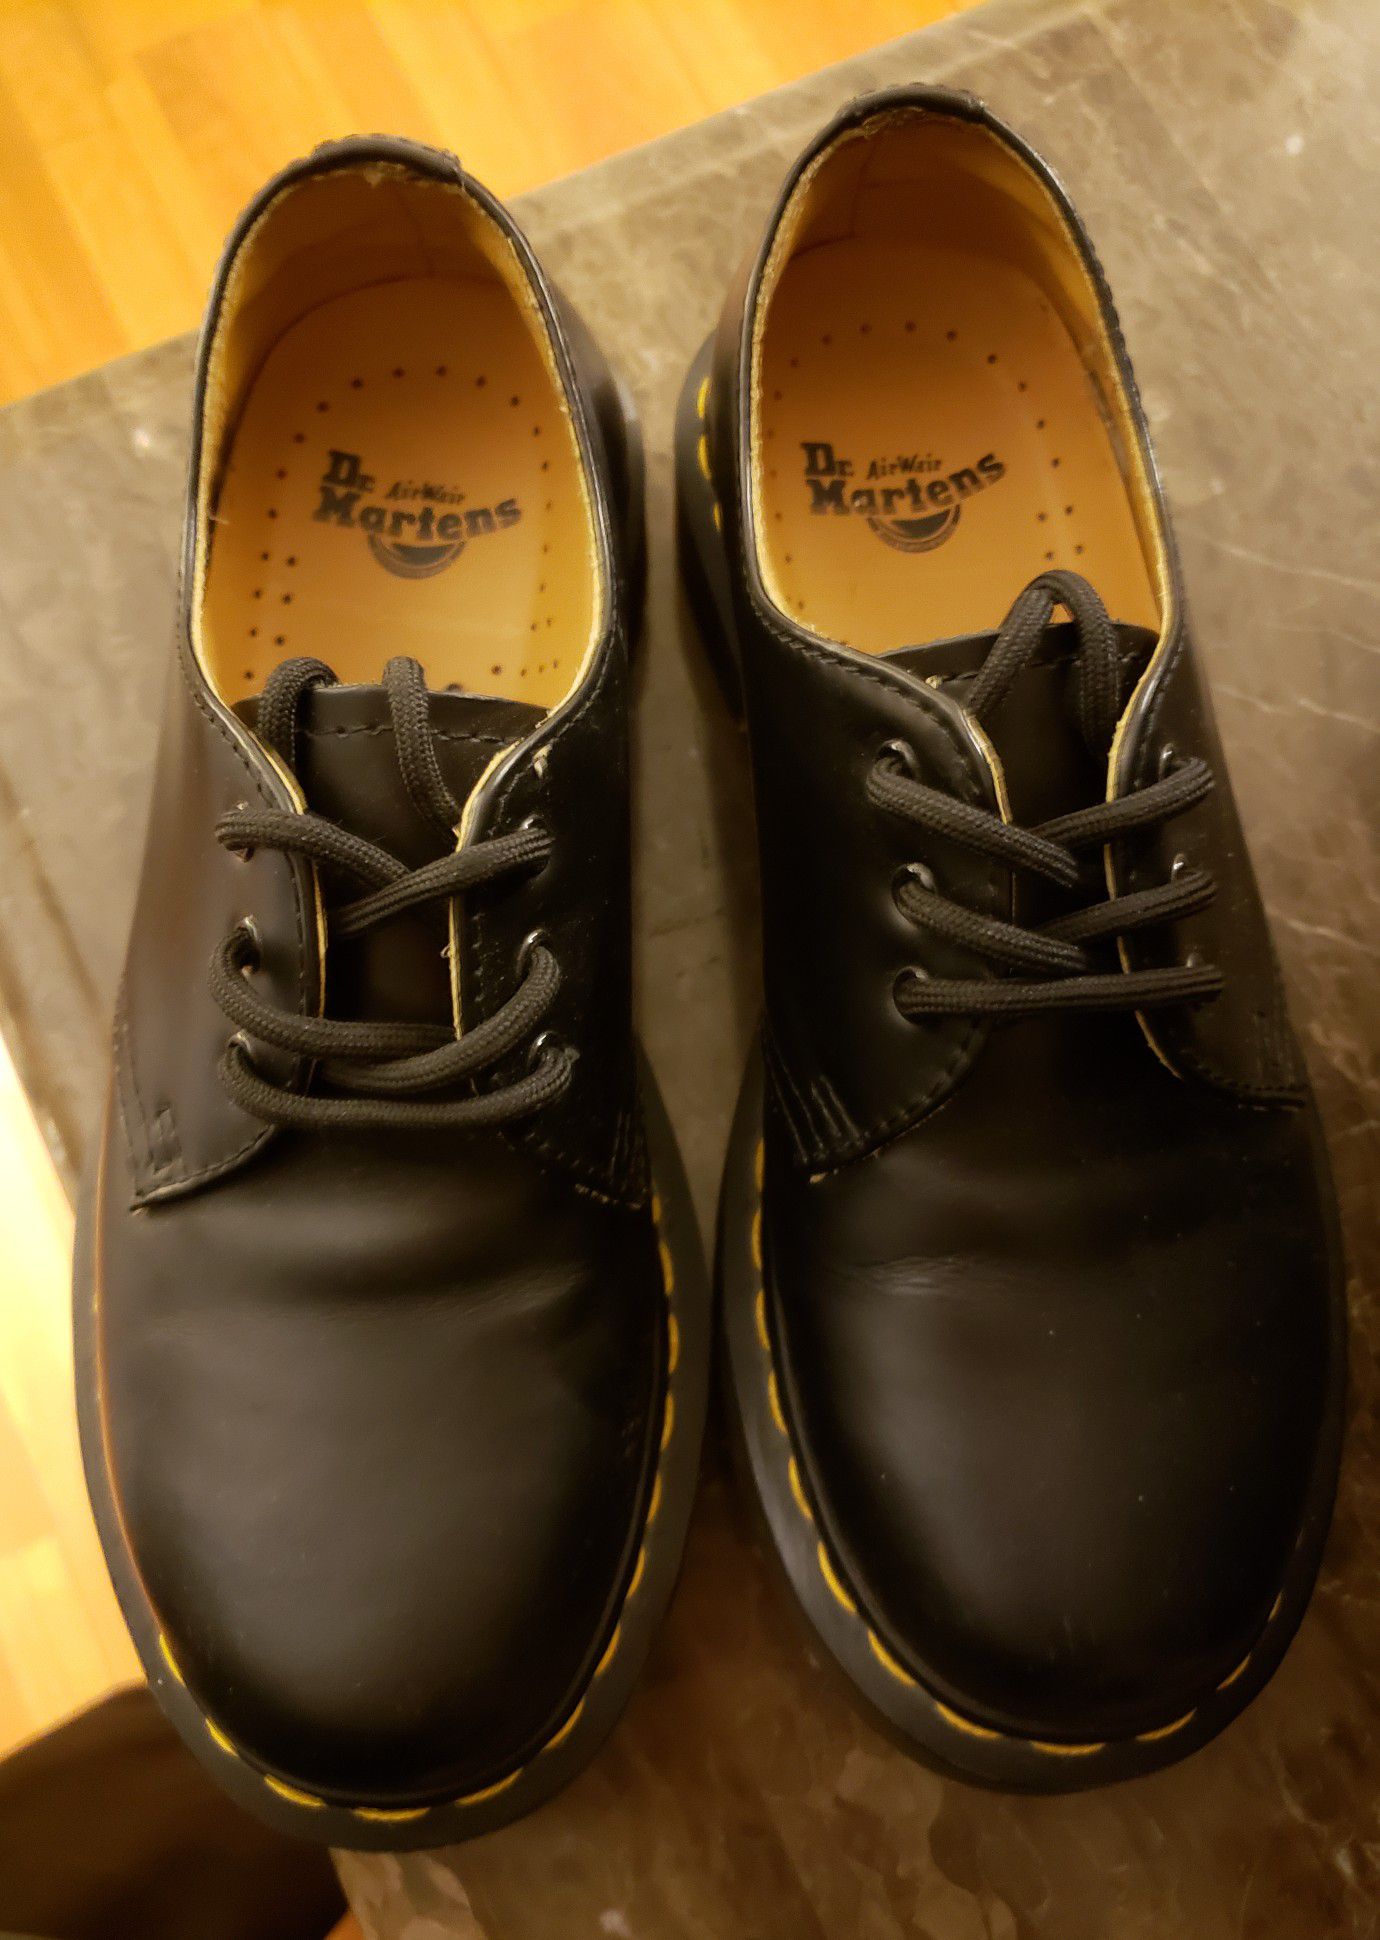 Doc Martens size 5 for Sale in Palmdale, CA - OfferUp